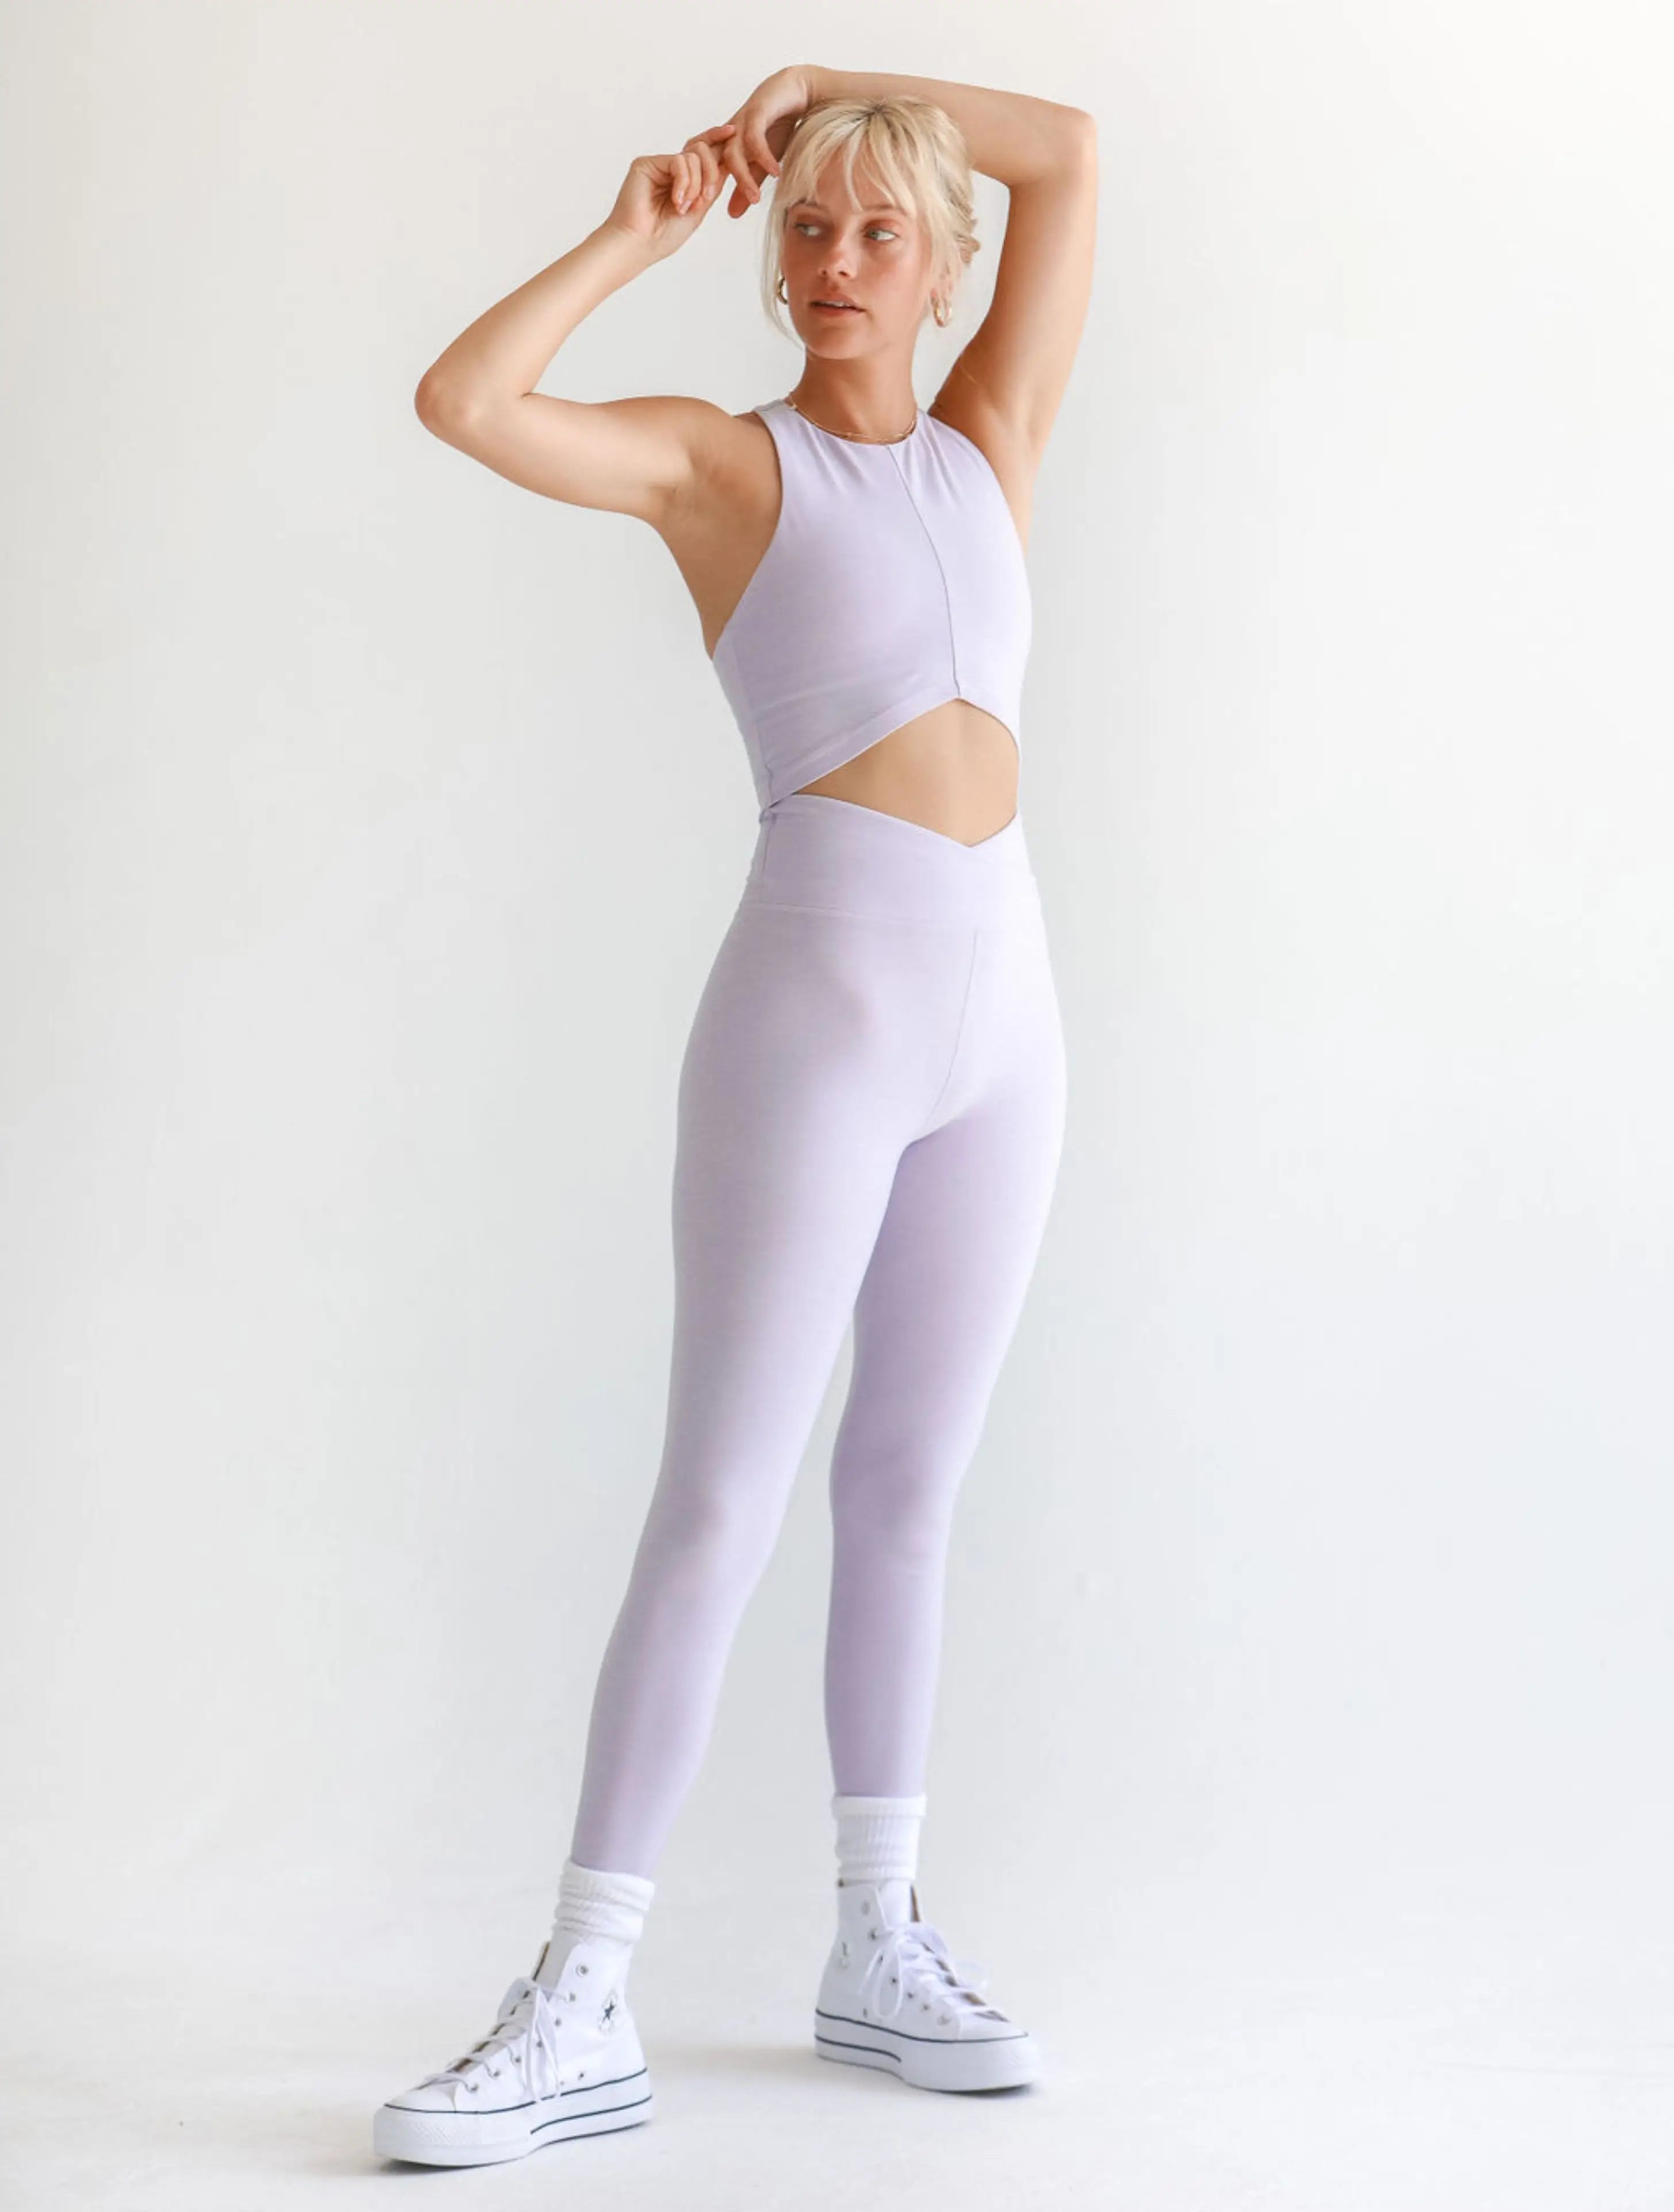 https://shopthecurate.com/cdn/shop/products/Playground-Active-Parker-Top-Laguna-Leggings-Lavender-Purple-Activewear-Sustainable-Ethical-Curate-02_8f2088bd-5947-4b07-8654-7f794a12c3d9.webp?v=1660923700&width=2912